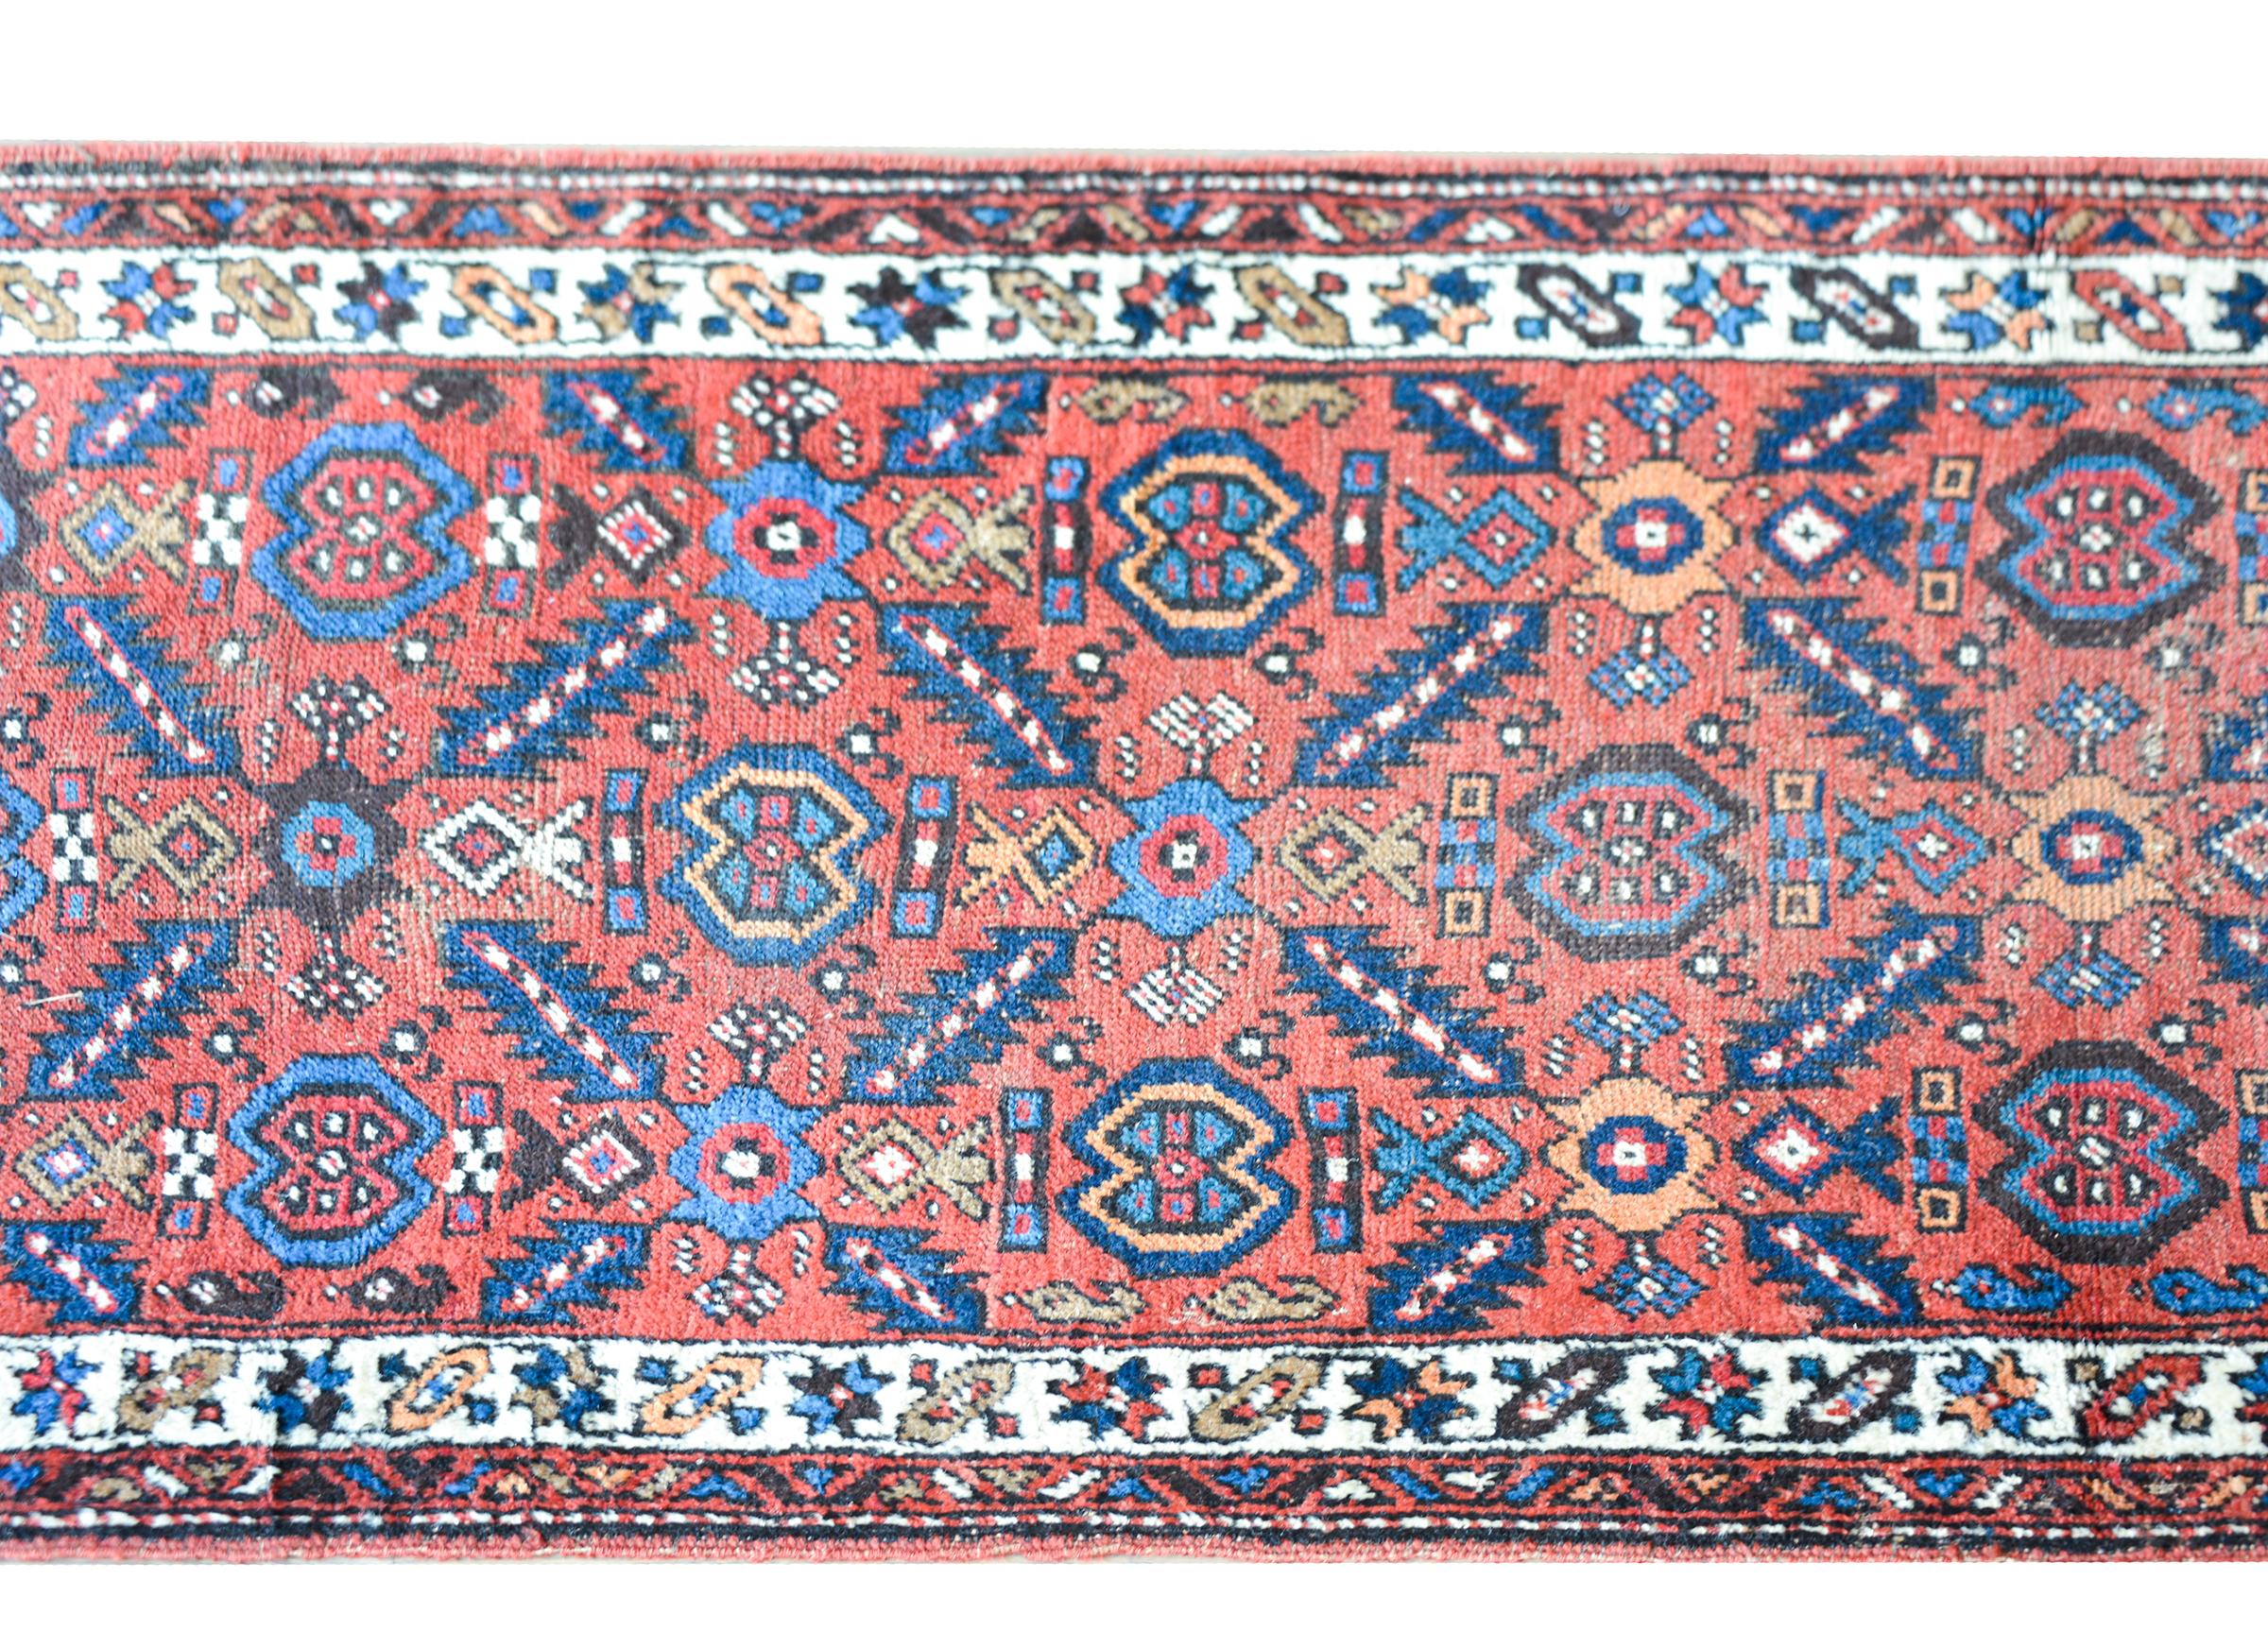 An outstanding early 20th century Karabagh rug with a beautiful trellis pattern with myriad stylized flowers and leaves woven light and dark indigo, white, and cream set against a wonderful pale crimson background and surrounded by a border with